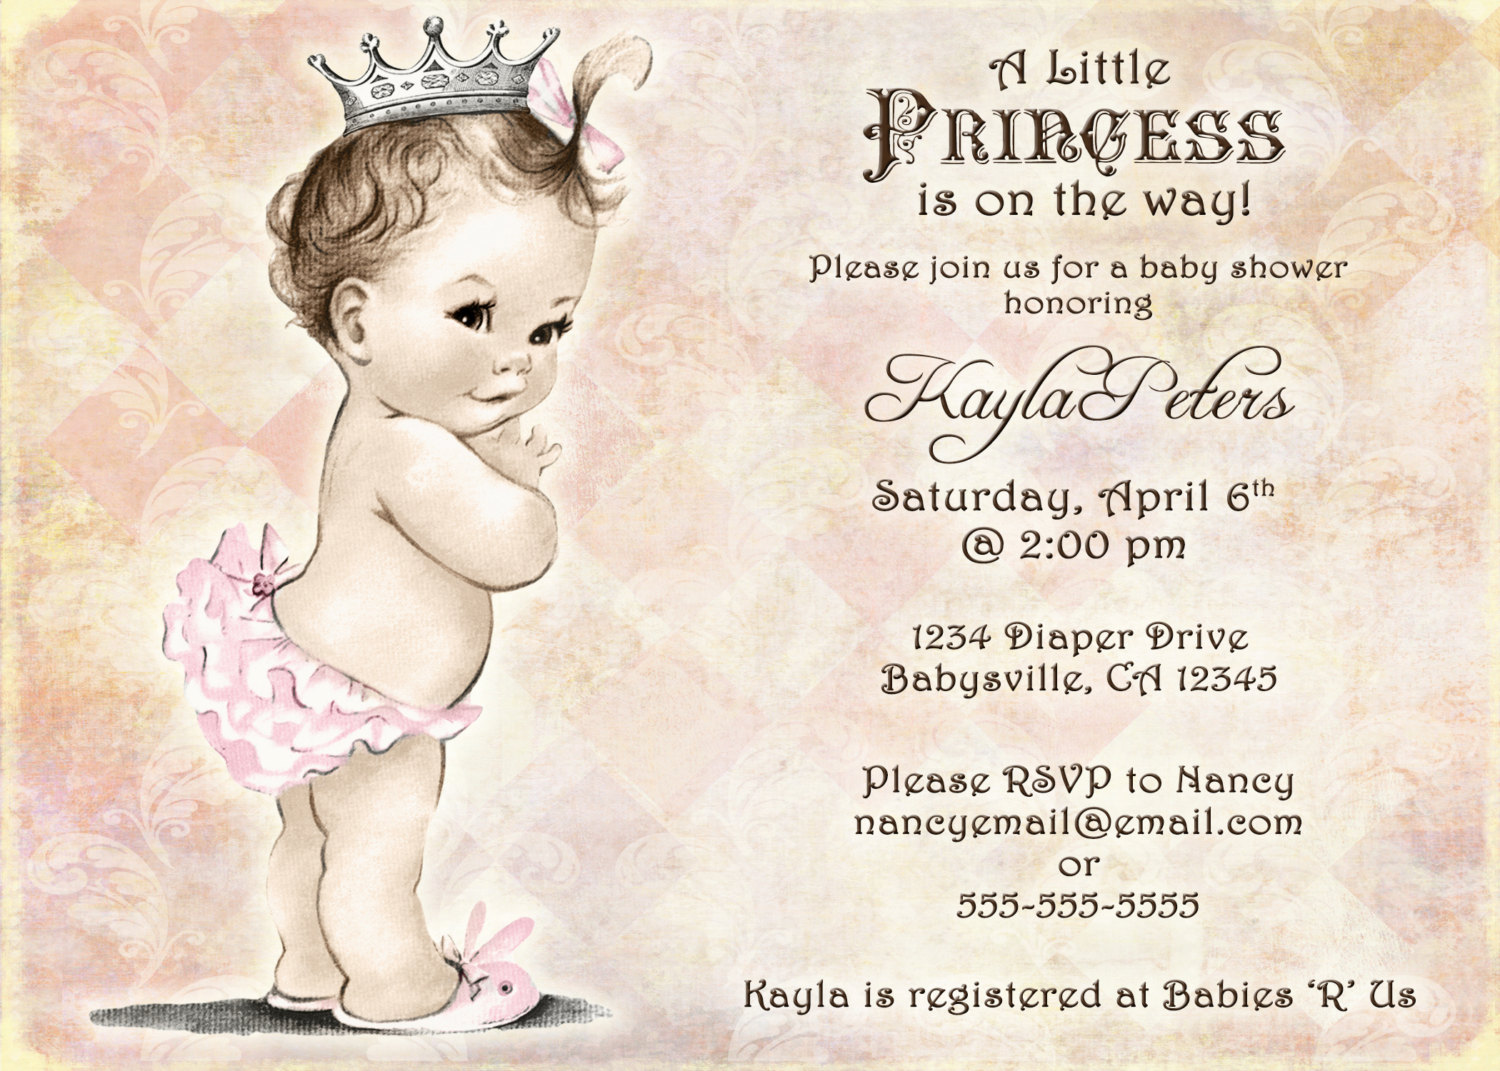 Full Size of Baby Shower:cheap Invitations Baby Shower Pinterest Baby Shower Ideas For Girls Baby Girl Themed Showers Pinterest Nursery Ideas Baby Boy Shower Ideas Themes For Baby Girl Nursery Baby Shower Themes Baby Shower Themes For Girls